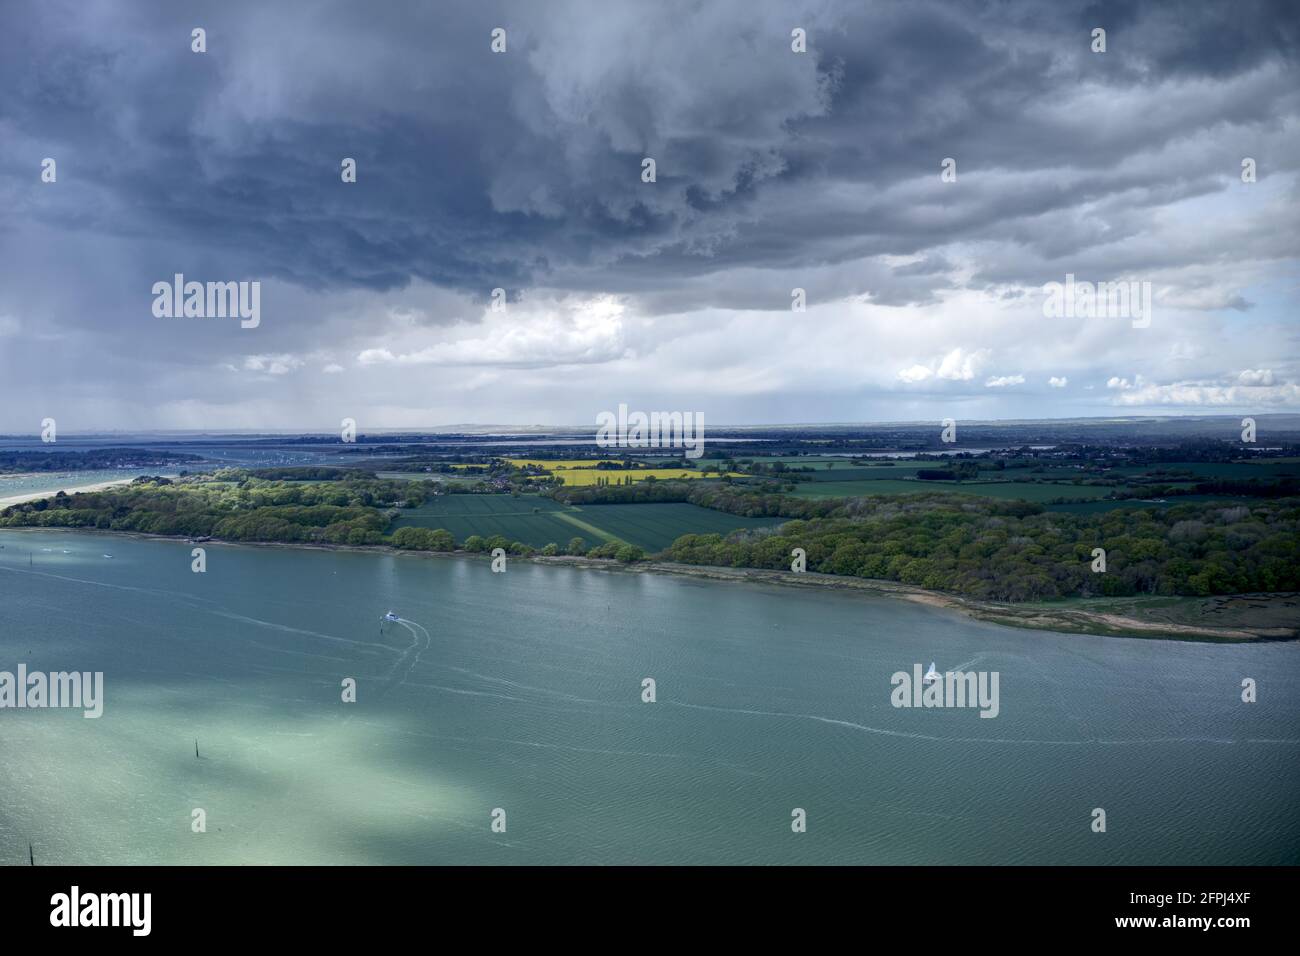 Dark cumulus storm clouds over the West Sussex countryside and estuary near Chichester Marina with sailing boats in the water. Aerial photo. Stock Photo